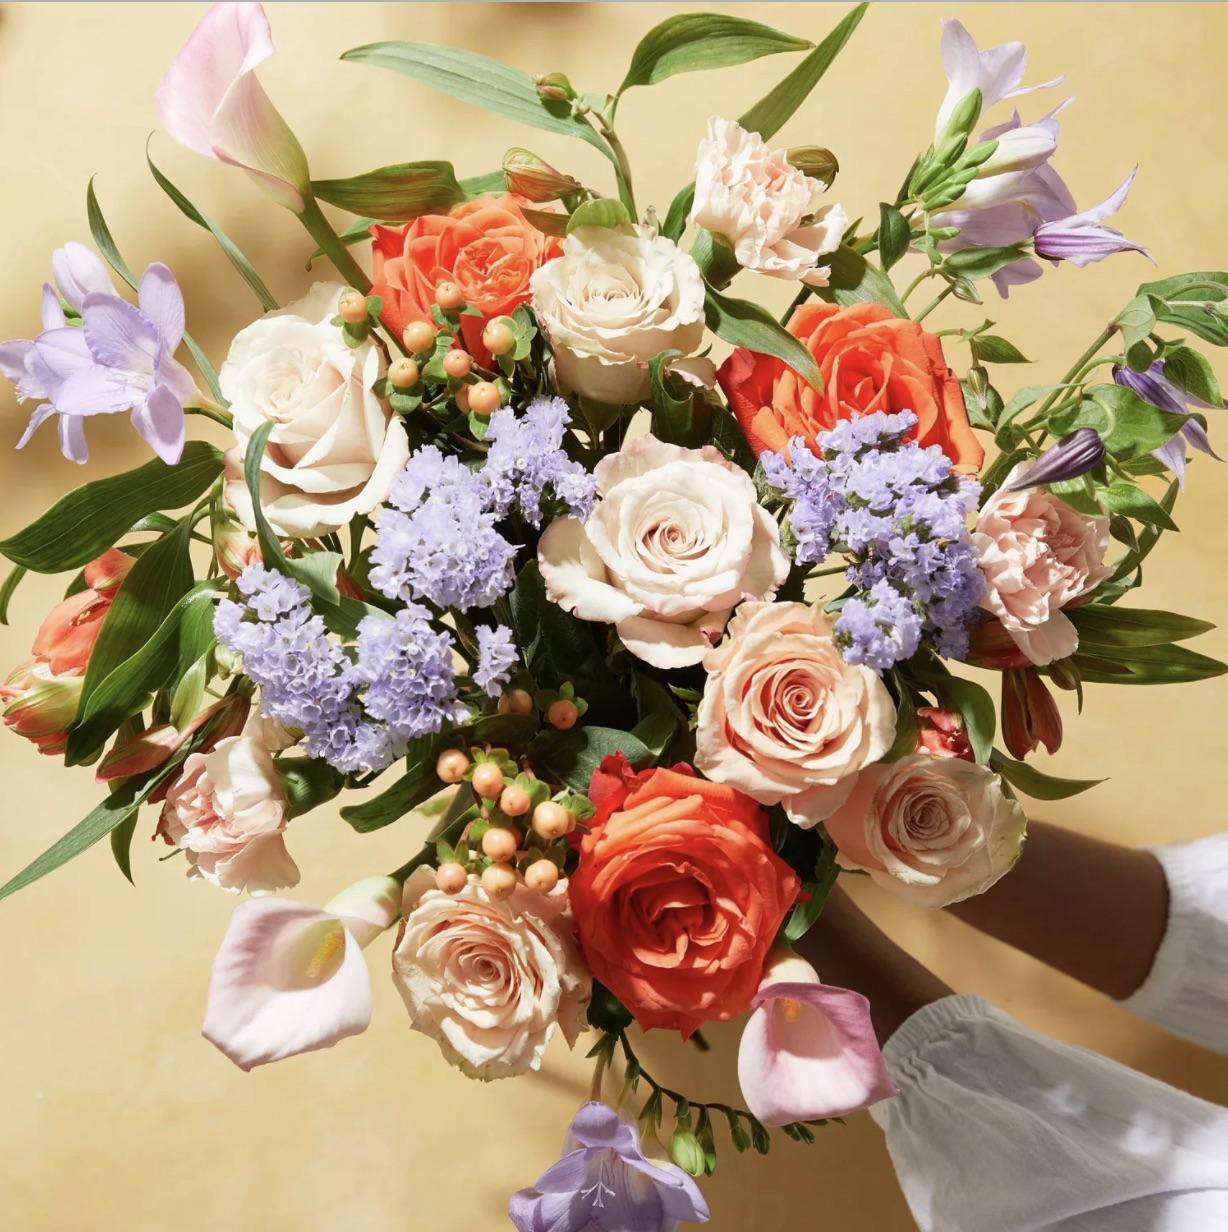 UK's Bloom & Wild raises $102M to seed its flower delivery service across  Europe | TechCrunch